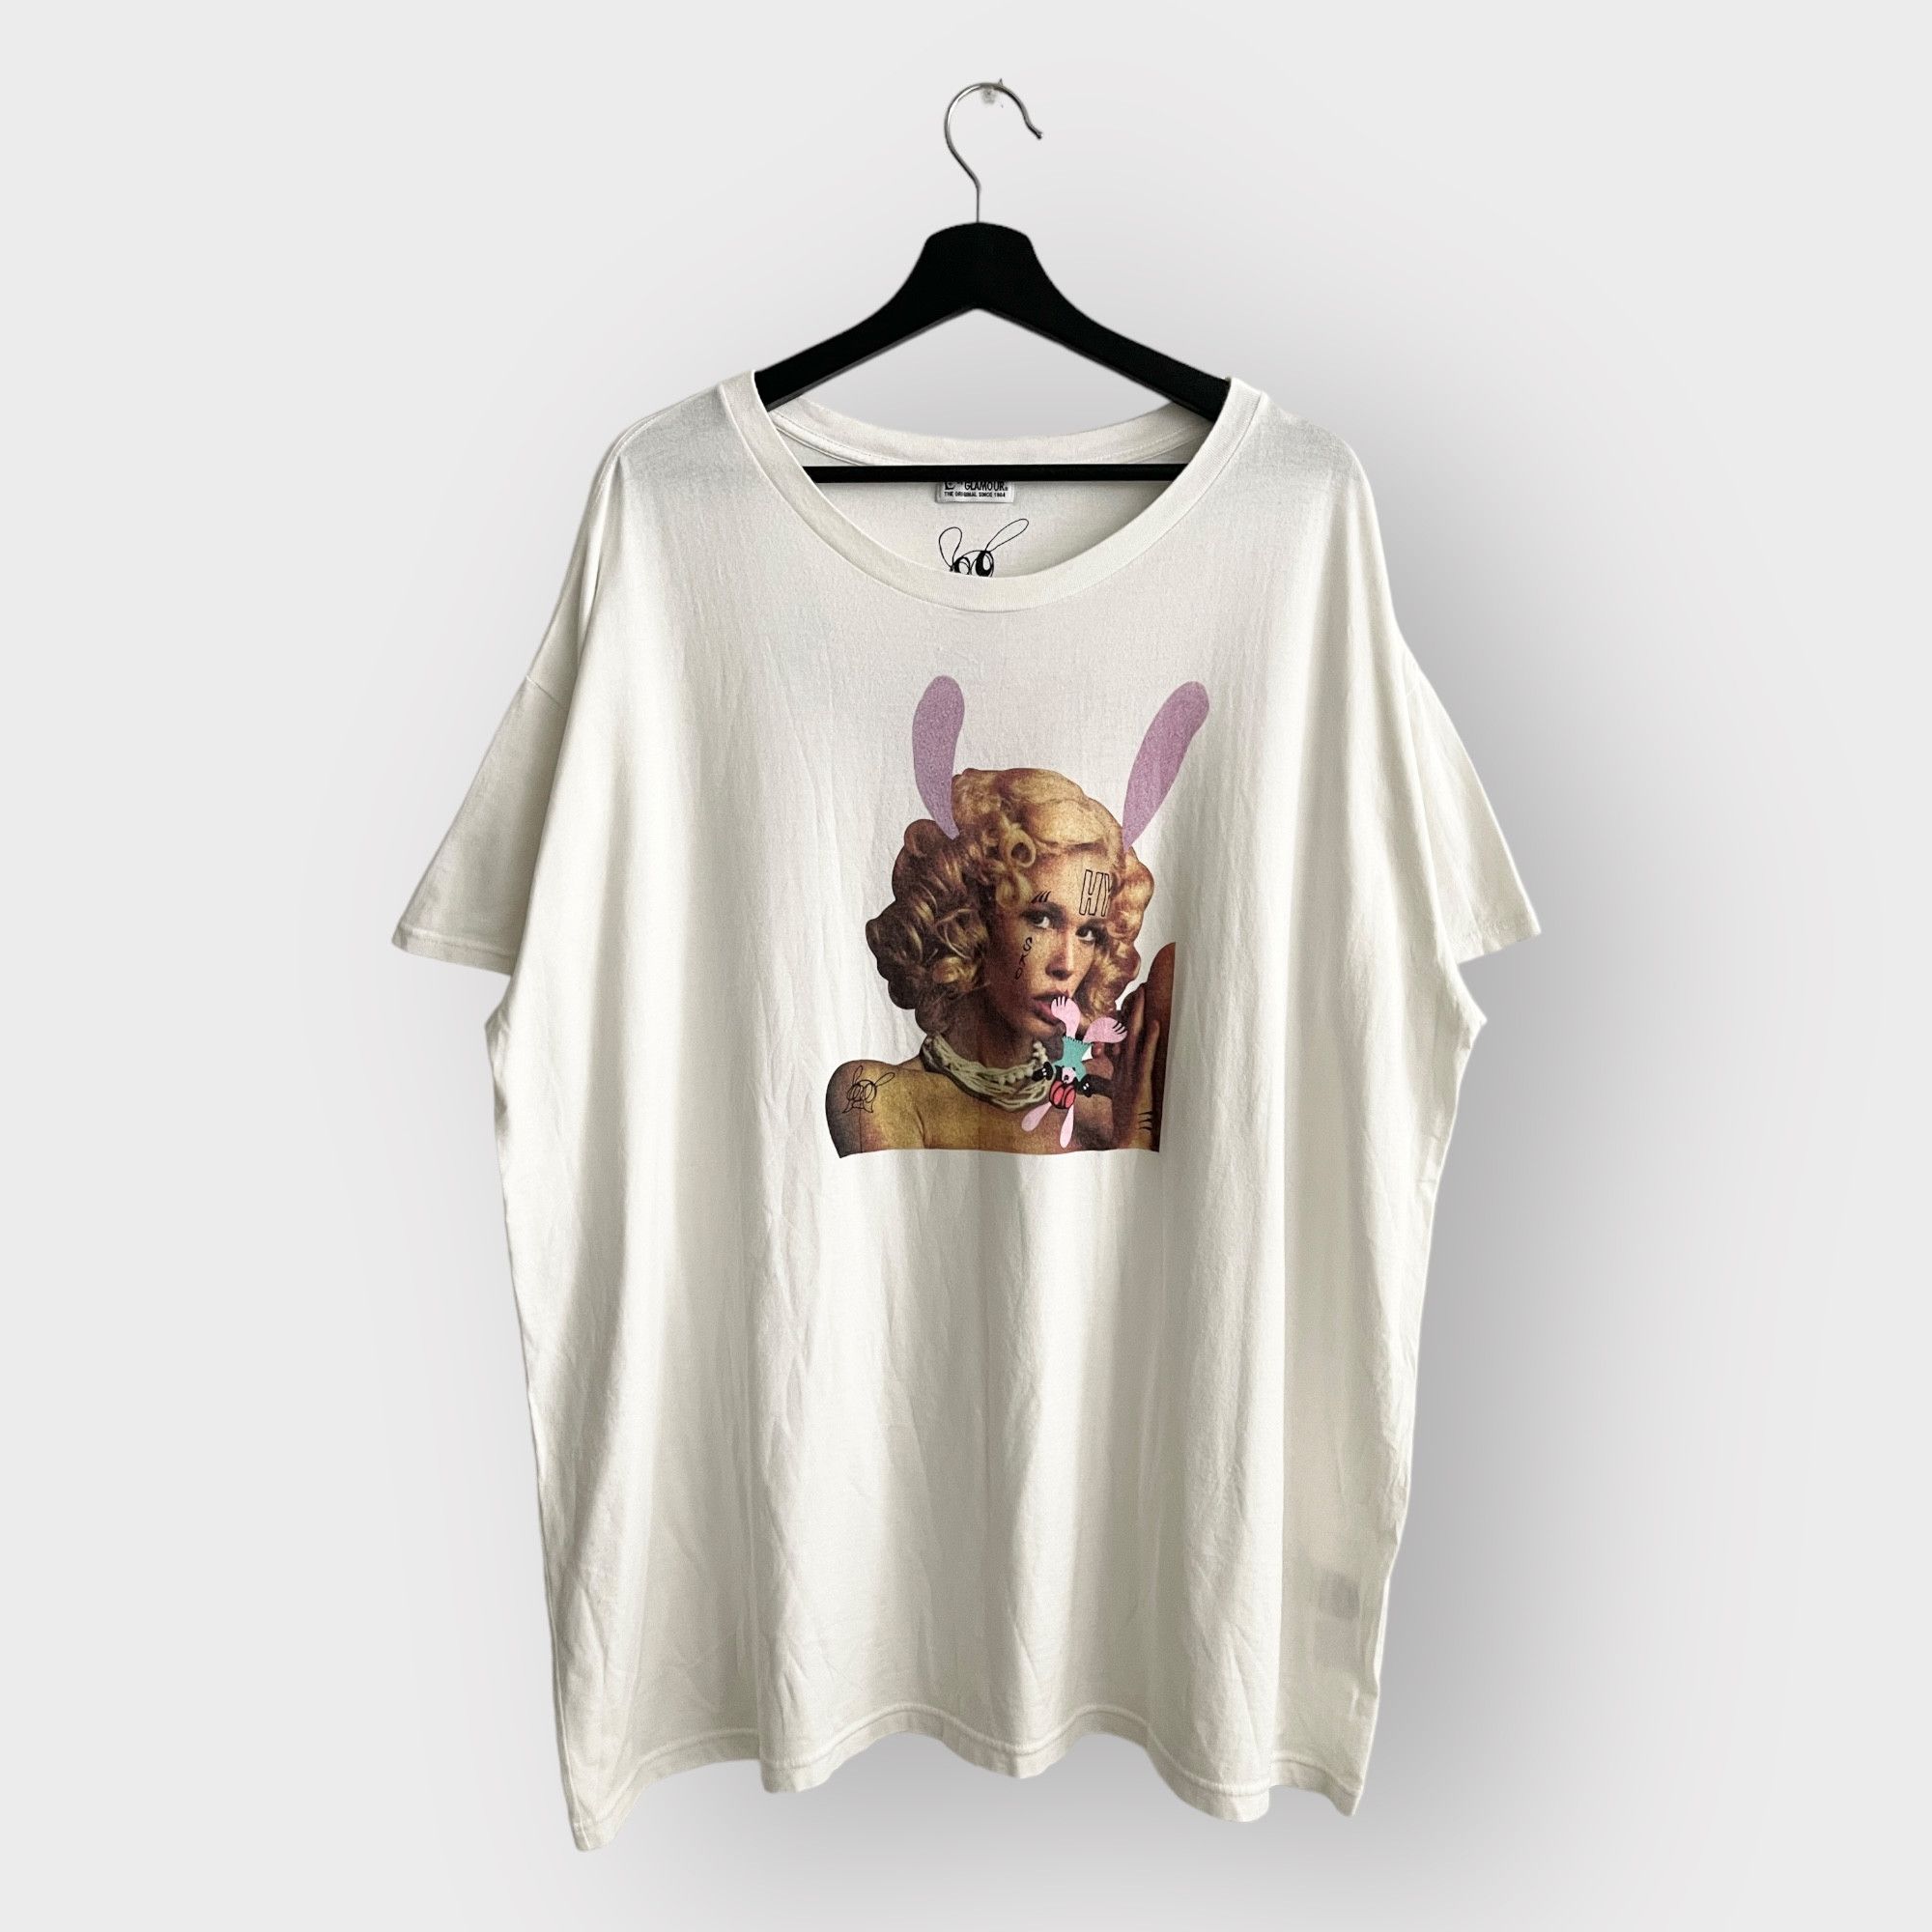 STEAL! 2010s Hysteric Glamour x Skoloct Bad Bunny Girl Tee - 2